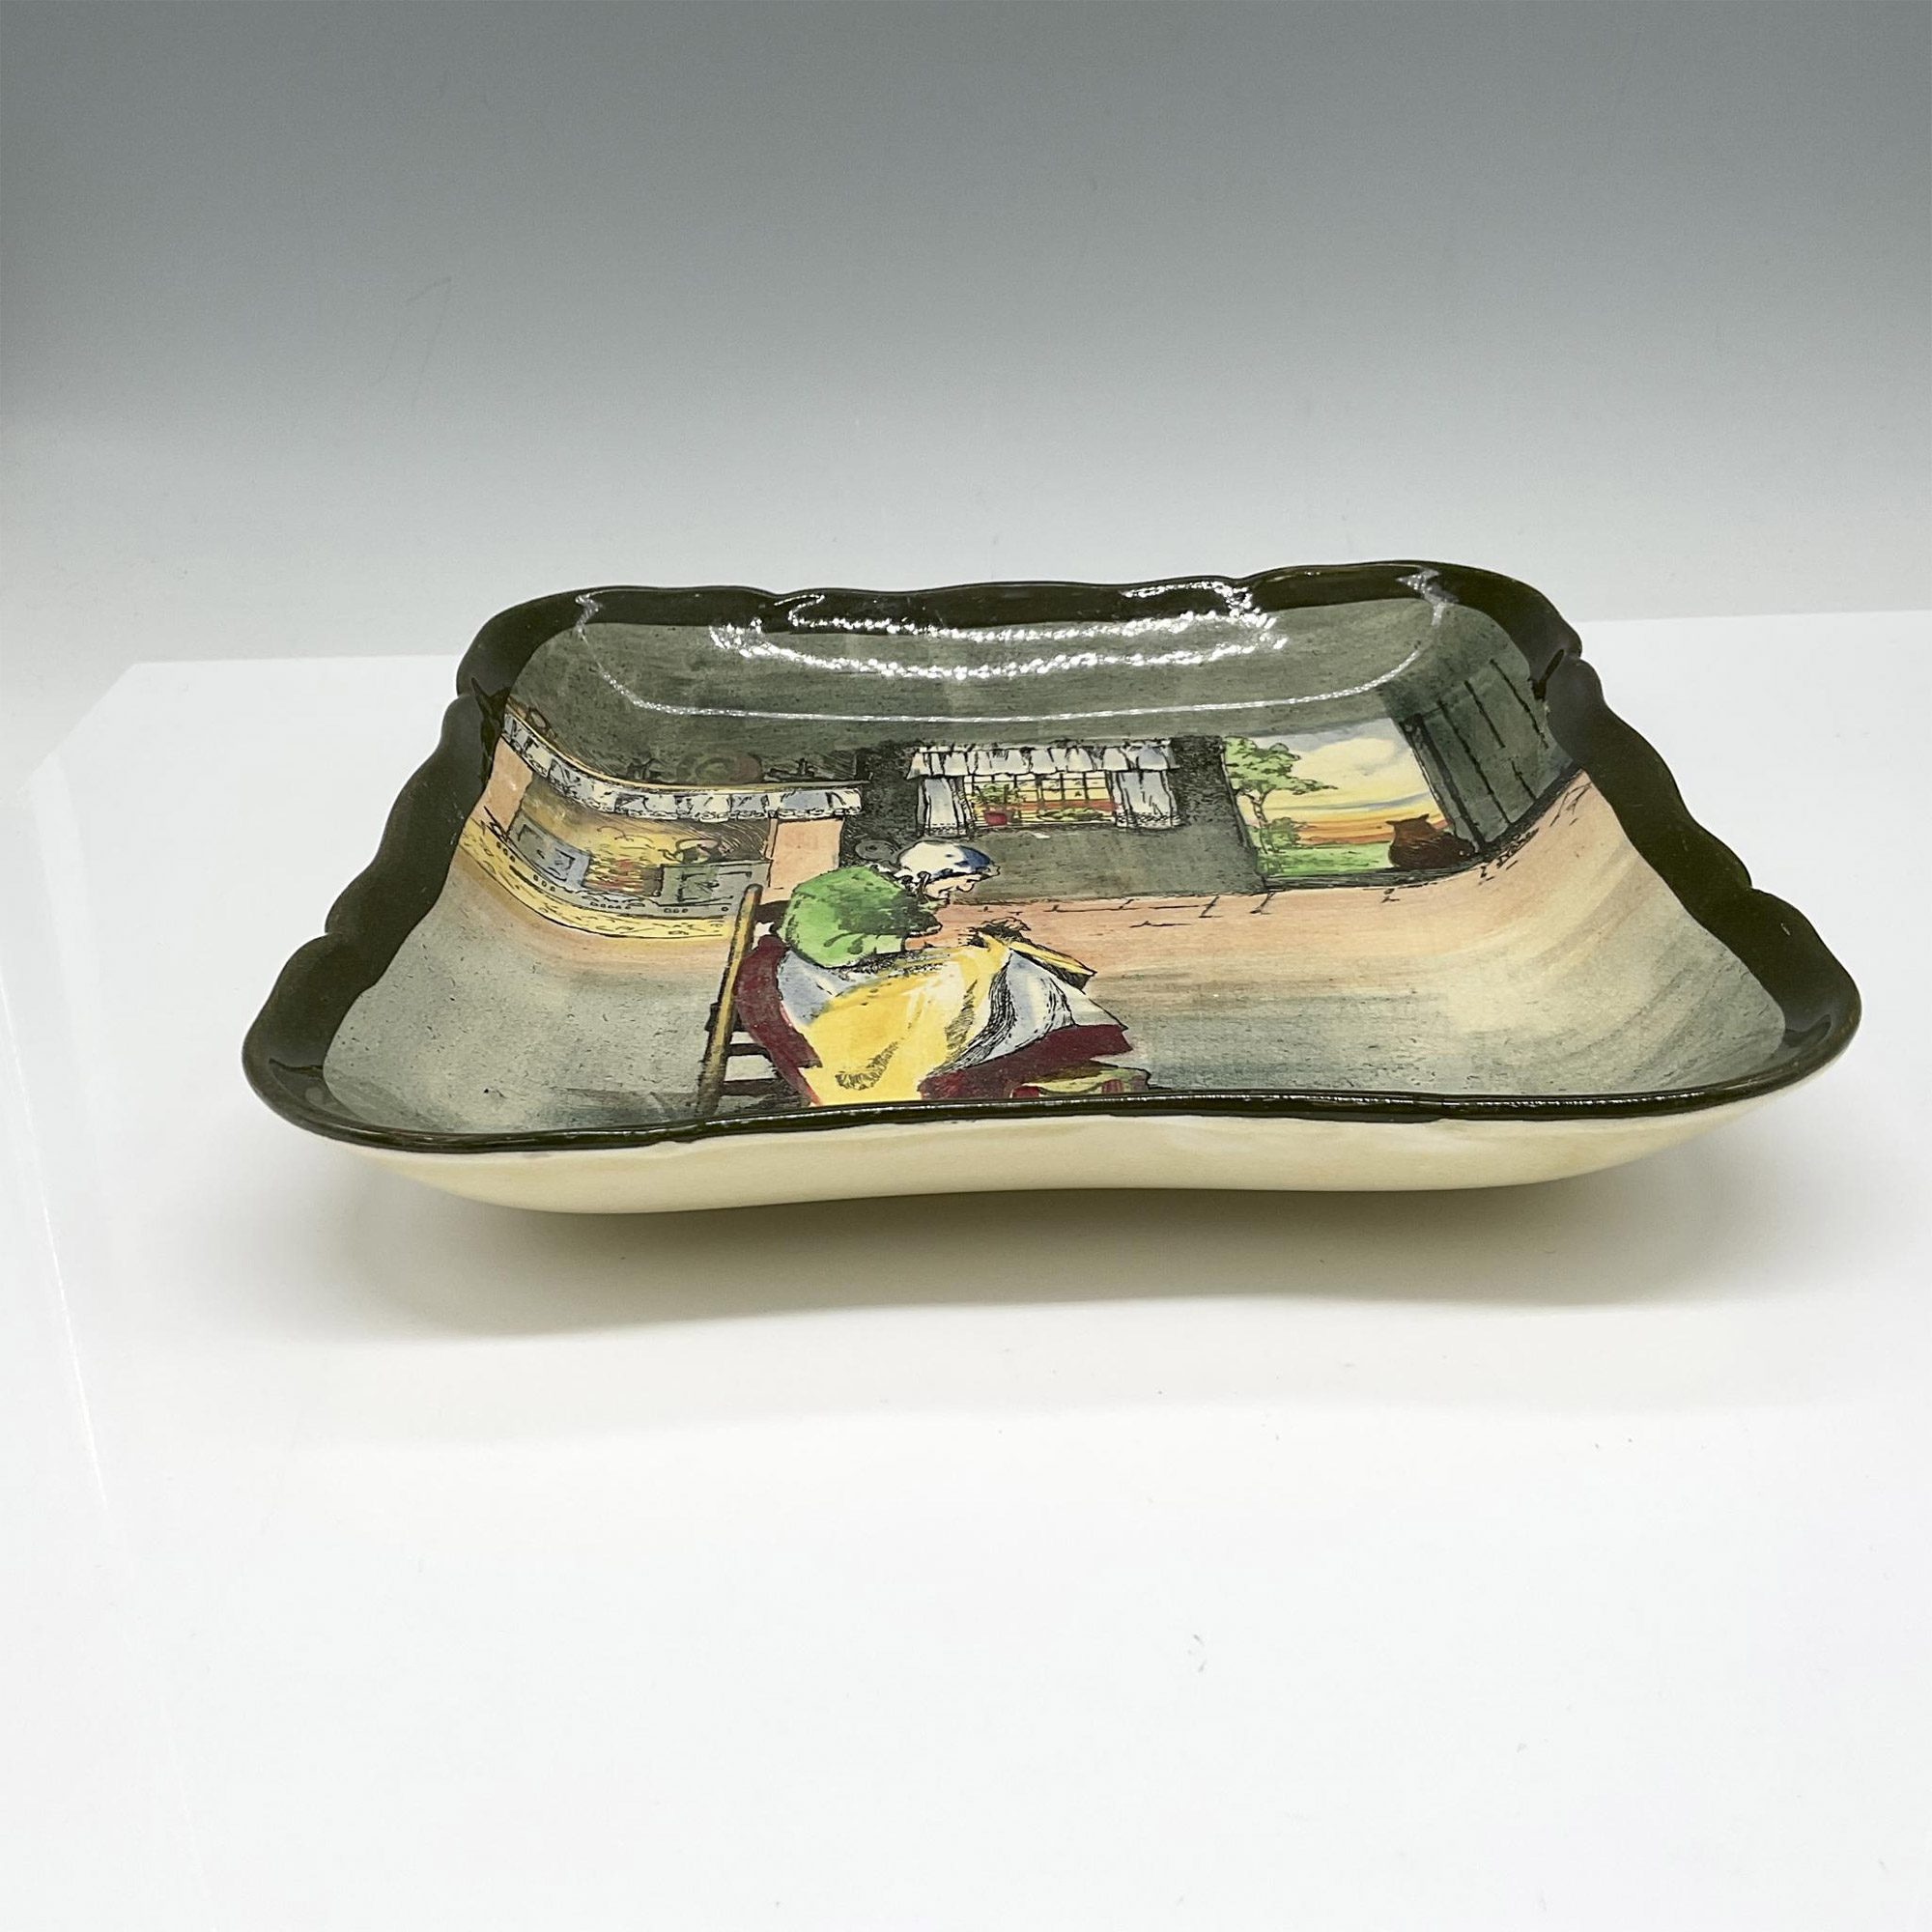 Royal Doulton Series Ware Plate, Fireside - Image 2 of 3